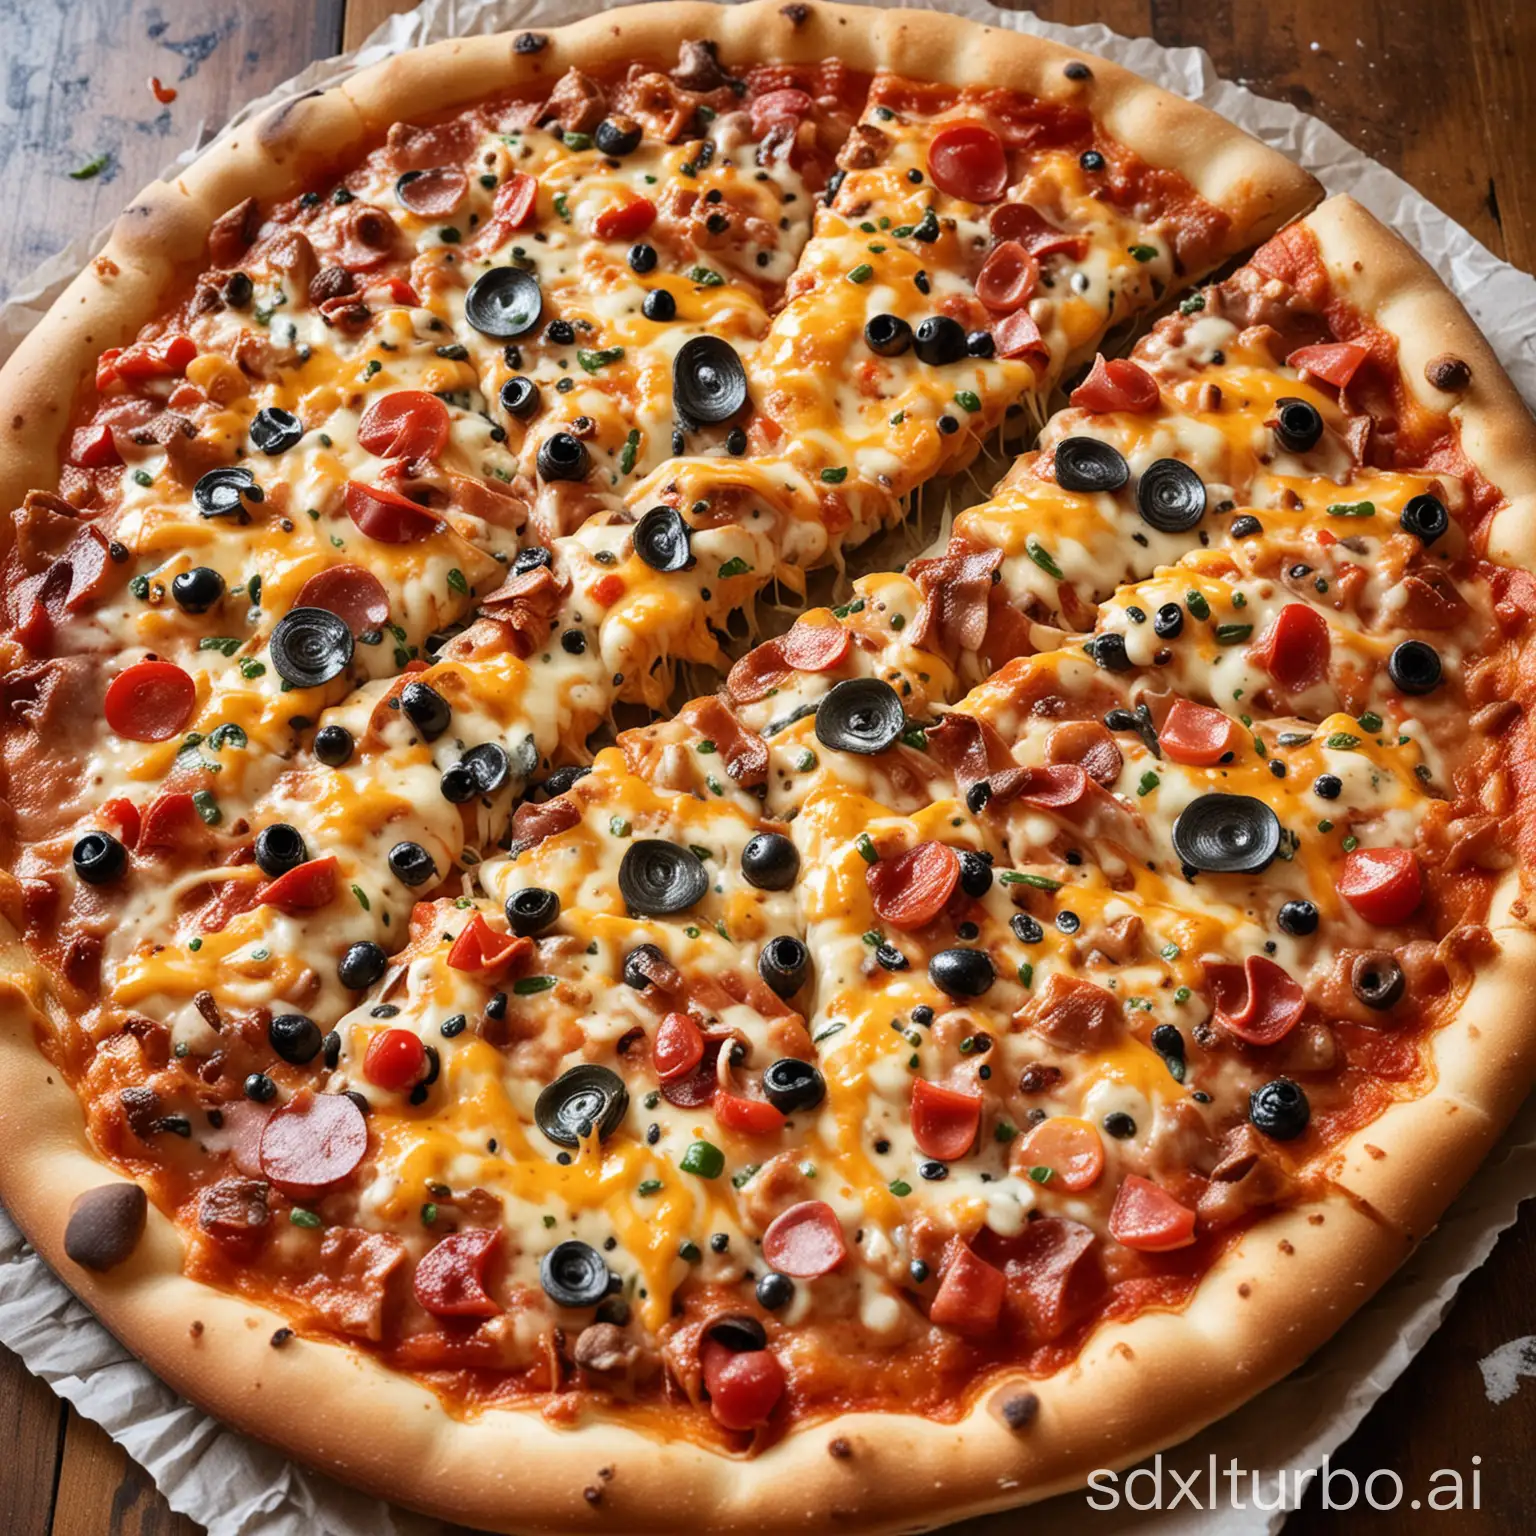 CloseUp-of-Freshly-Baked-Pizza-with-Colorful-Toppings-and-Crispy-Golden-Crust